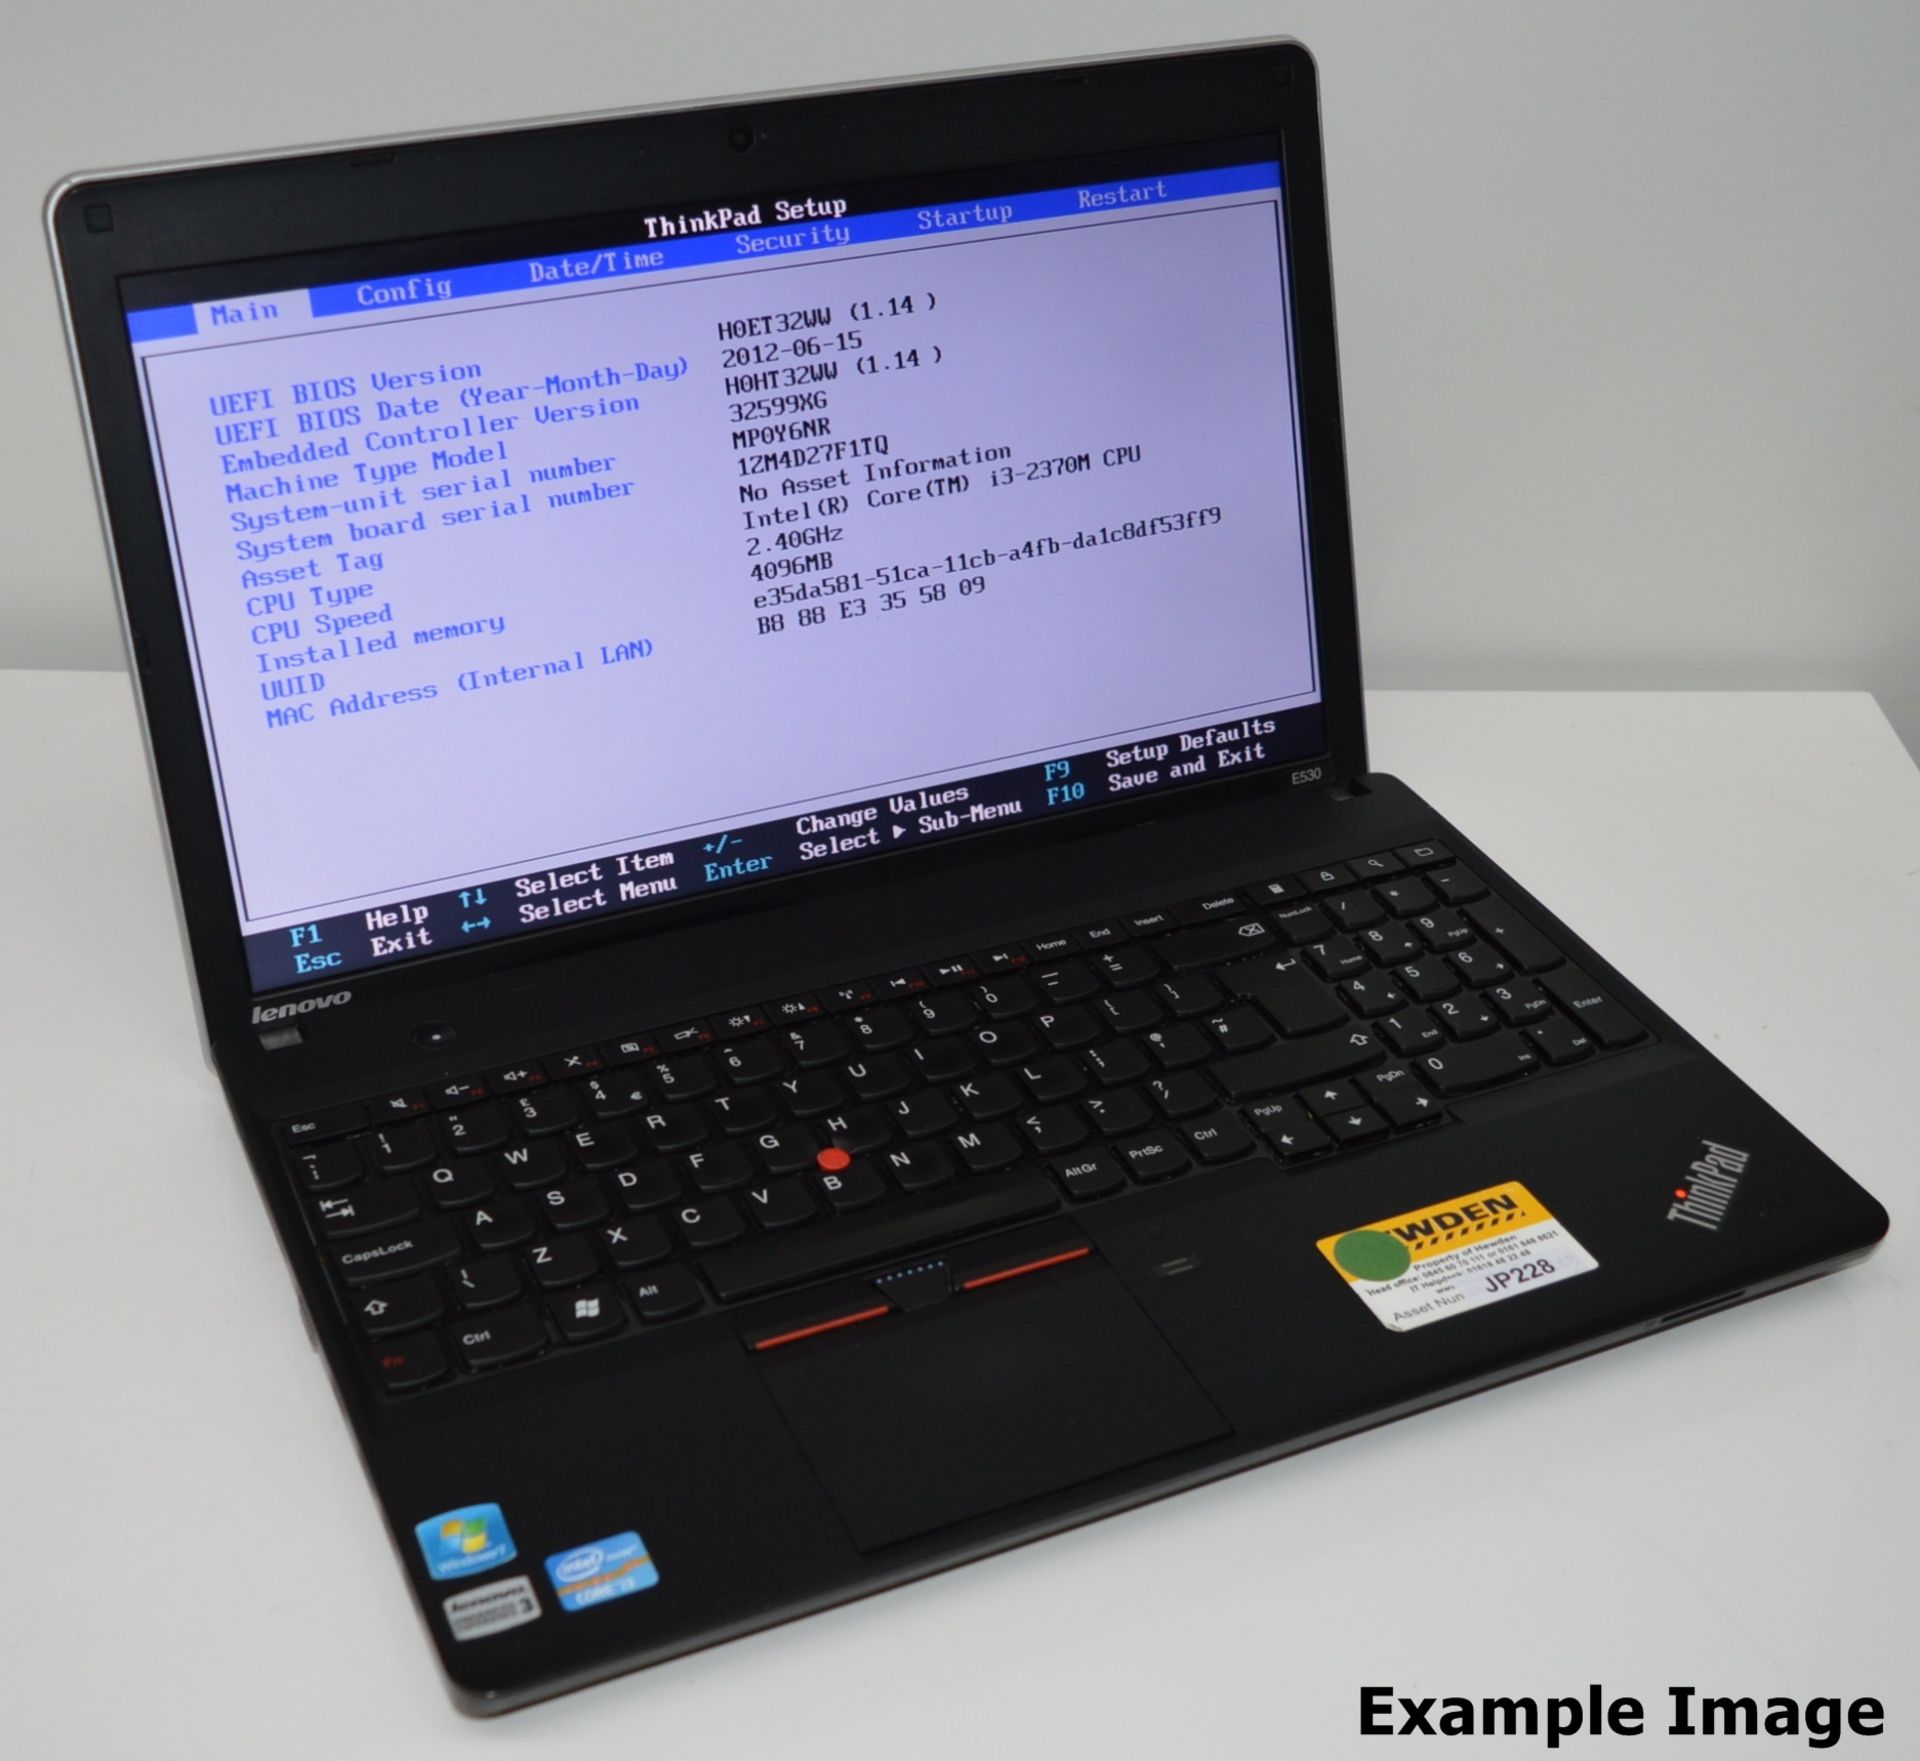 1 x Lenovo Thinkpad E530 Laptop Computer - Features 15.6 Inch Screen, Intel Core i3-2370M 2.4ghz